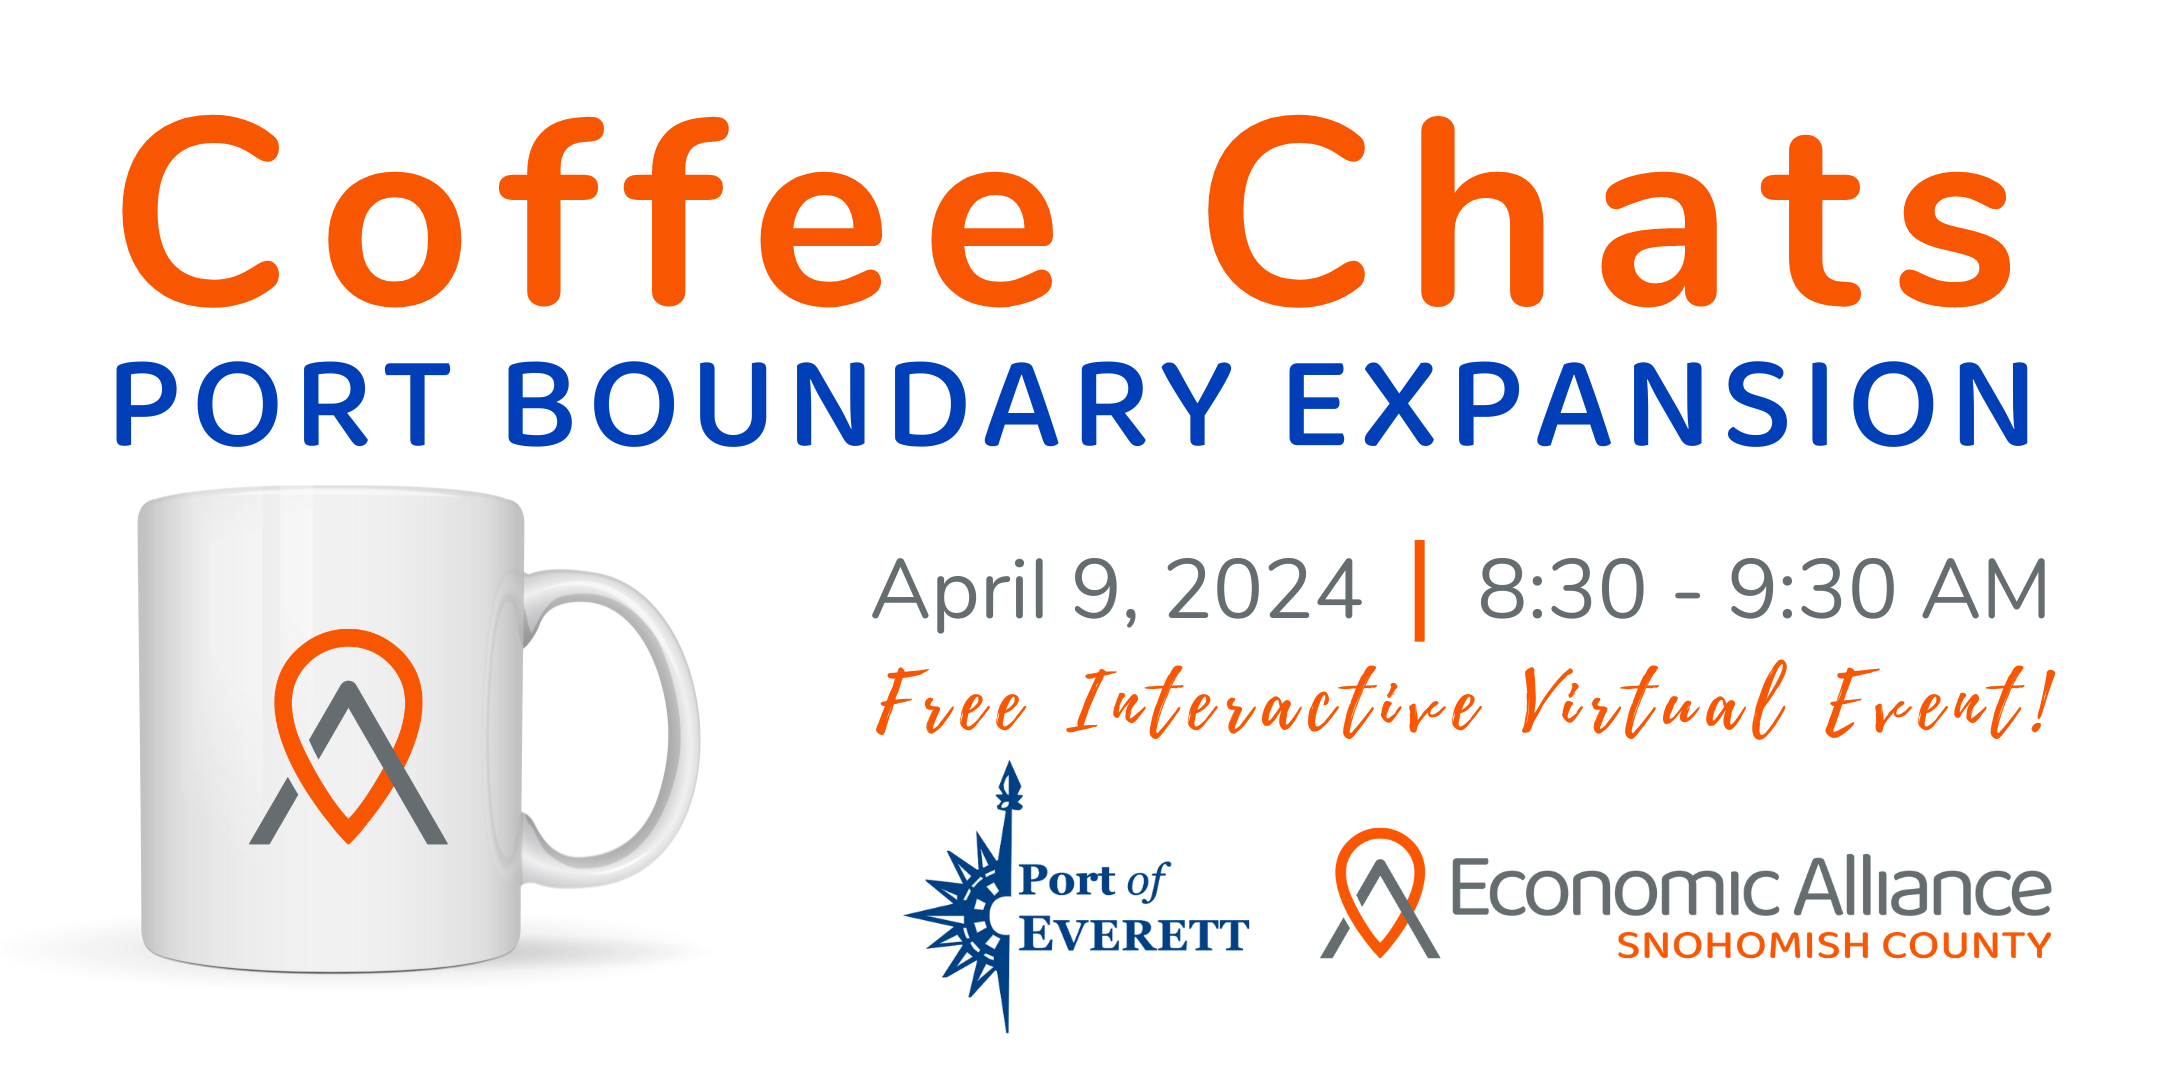 Coffee Chats: Port Boundary Expansion Photo